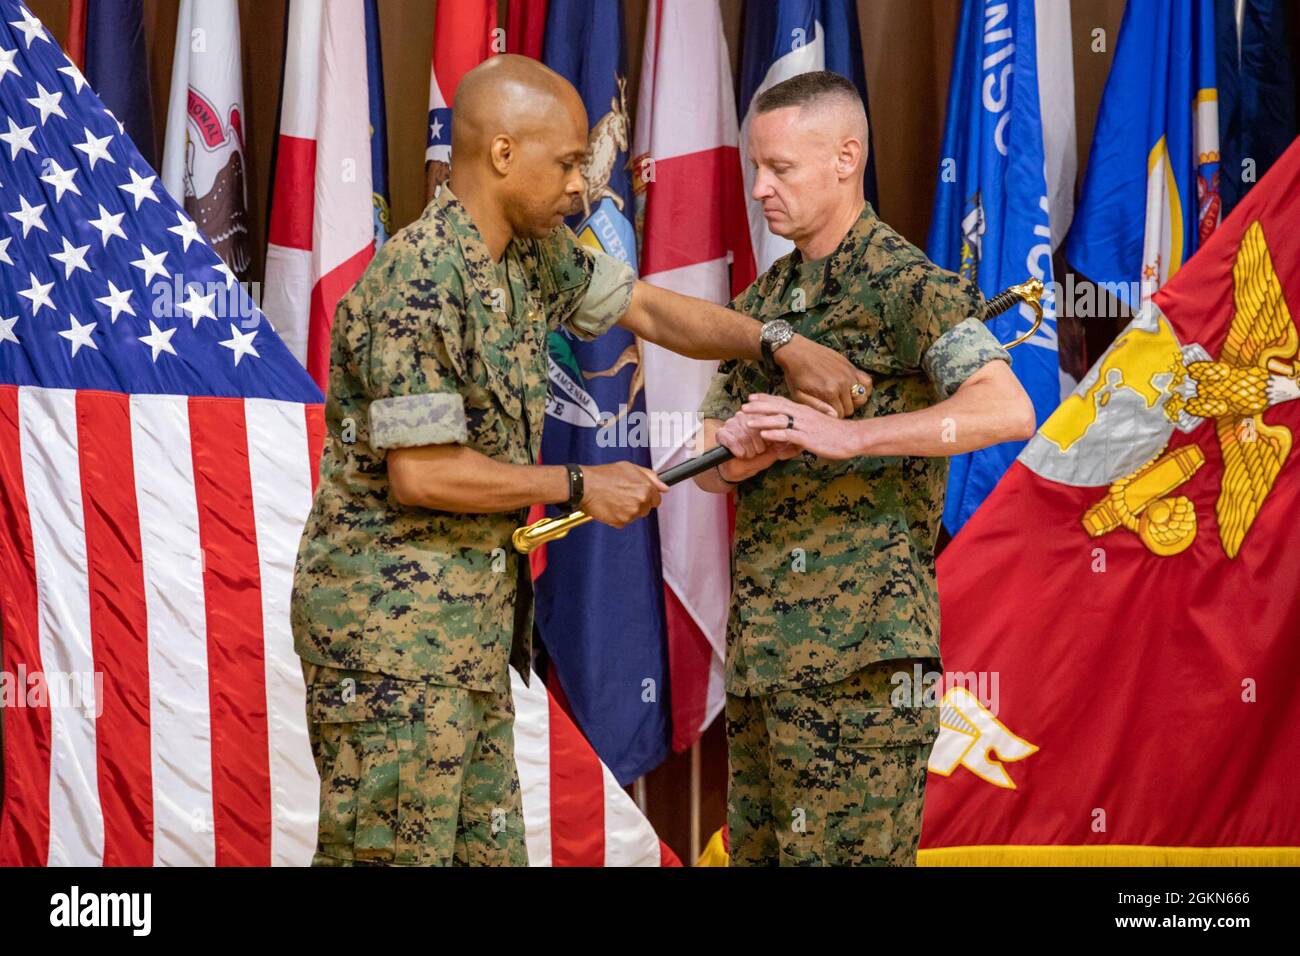 Sgt. Maj. Jason Wolken (right), sergeant major, Force Headquarters Group (FHG), receives a noncommissioned officer's sword from Brig. Gen. Sean Day, commanding general, FHG, during the sergeant major relief and appointment ceremony at Marine Corps Support Facility New Orleans on June 3, 2021. Stock Photo